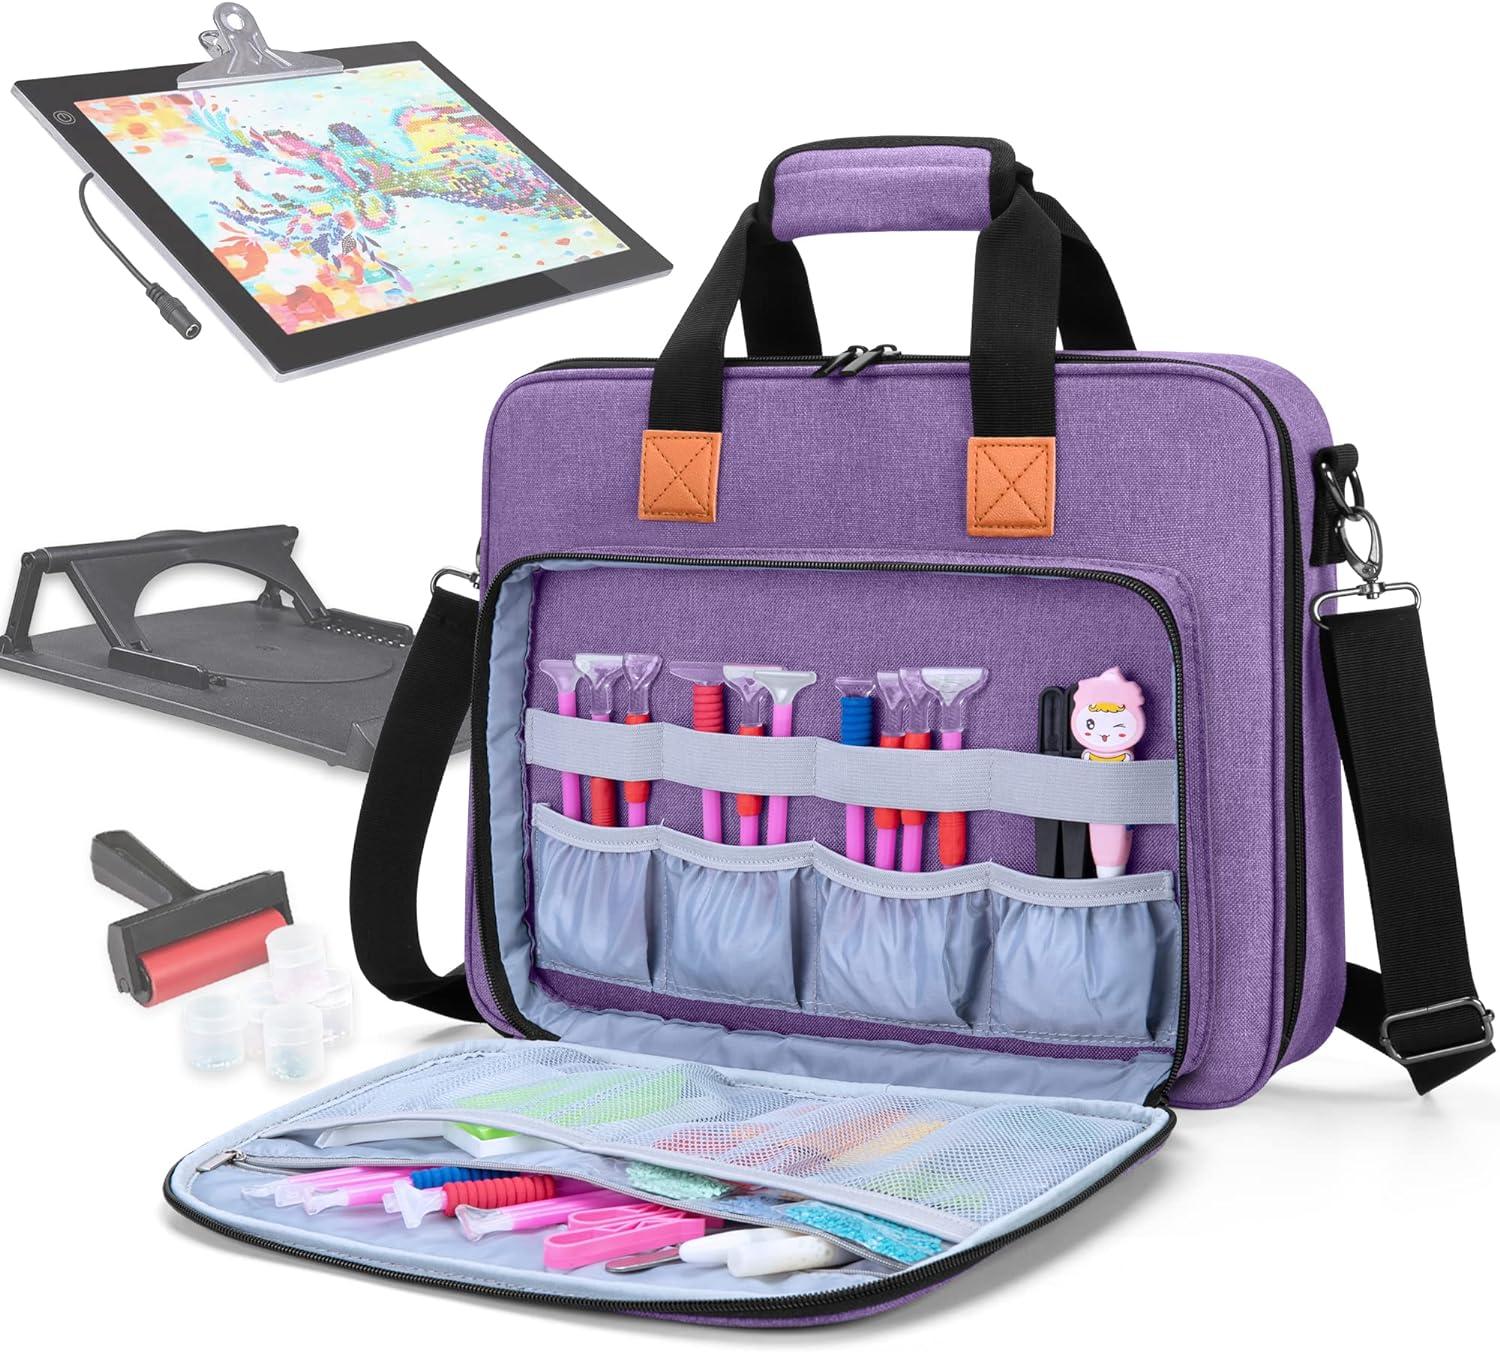 LUXJA Carrying Bag for A4 Light Pad and Diamond Painting Tools, Protective Case for Diamond Painting Light Box and Accessories (Fits for A4 Light Pad), Purple (Bag Only)